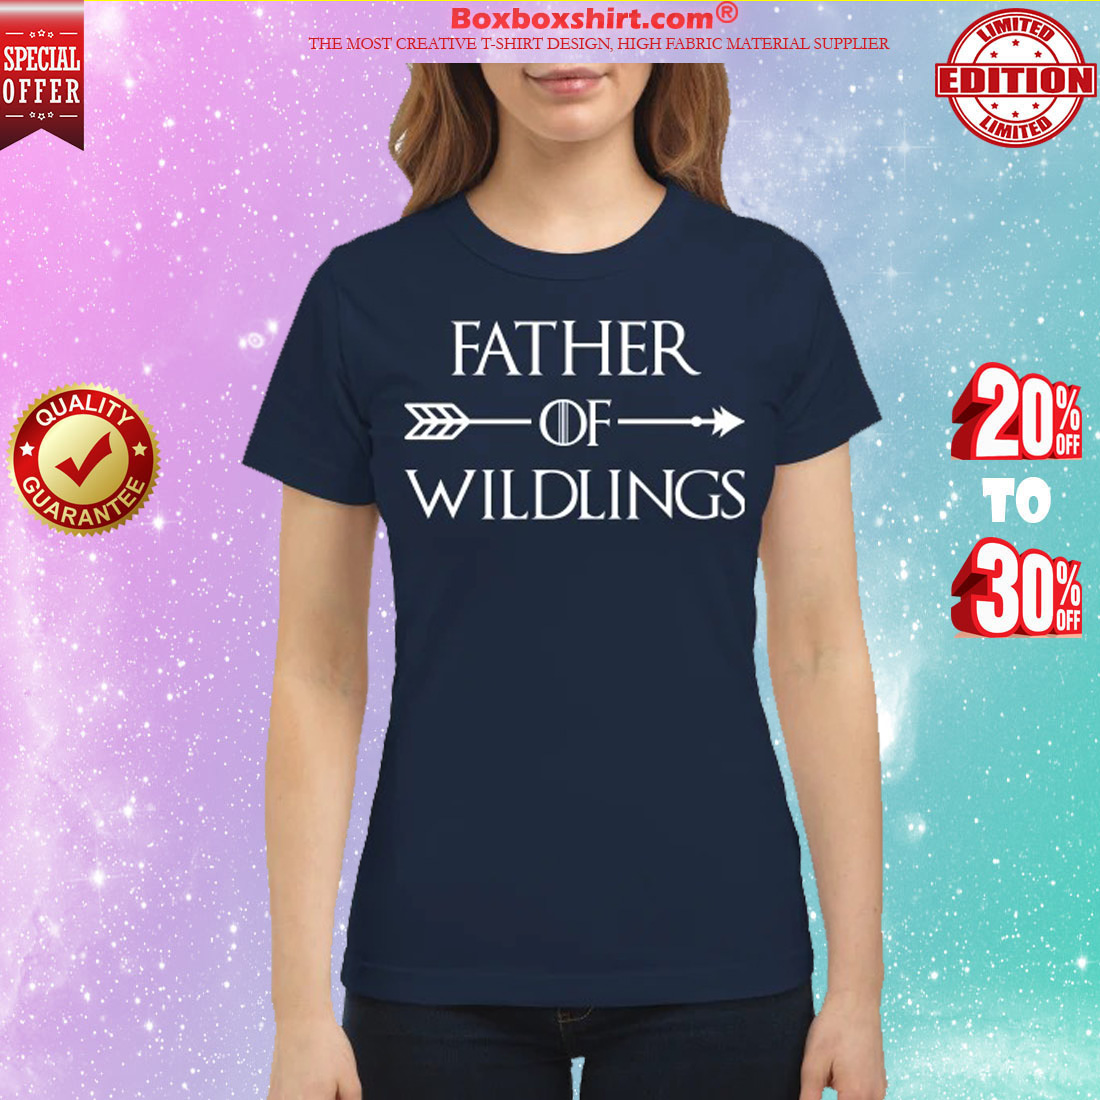 Game of Thrones father of wildings classic shirt